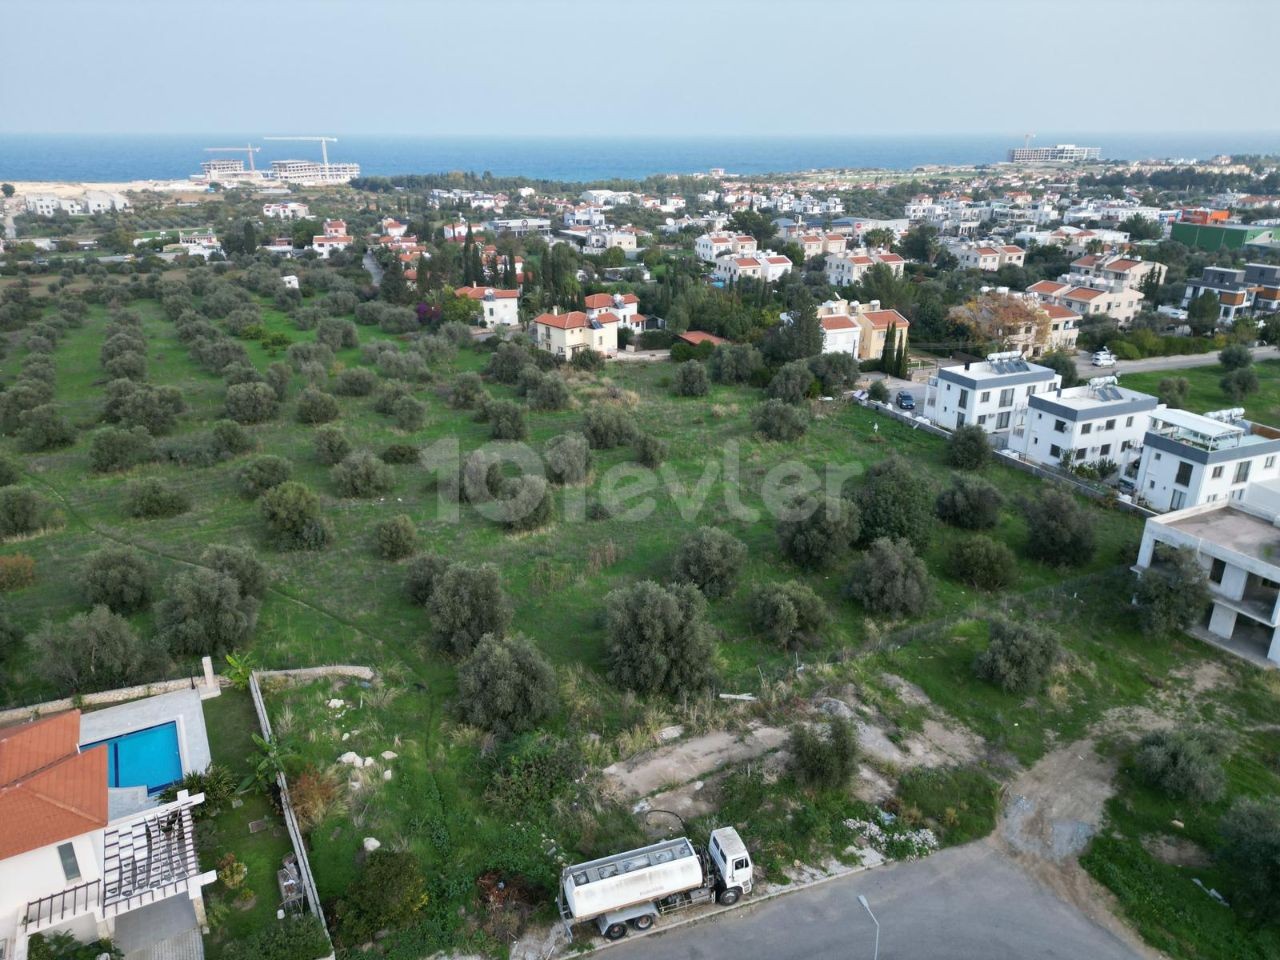 7. 5 acres in Supreme Market District with 17 villa projects